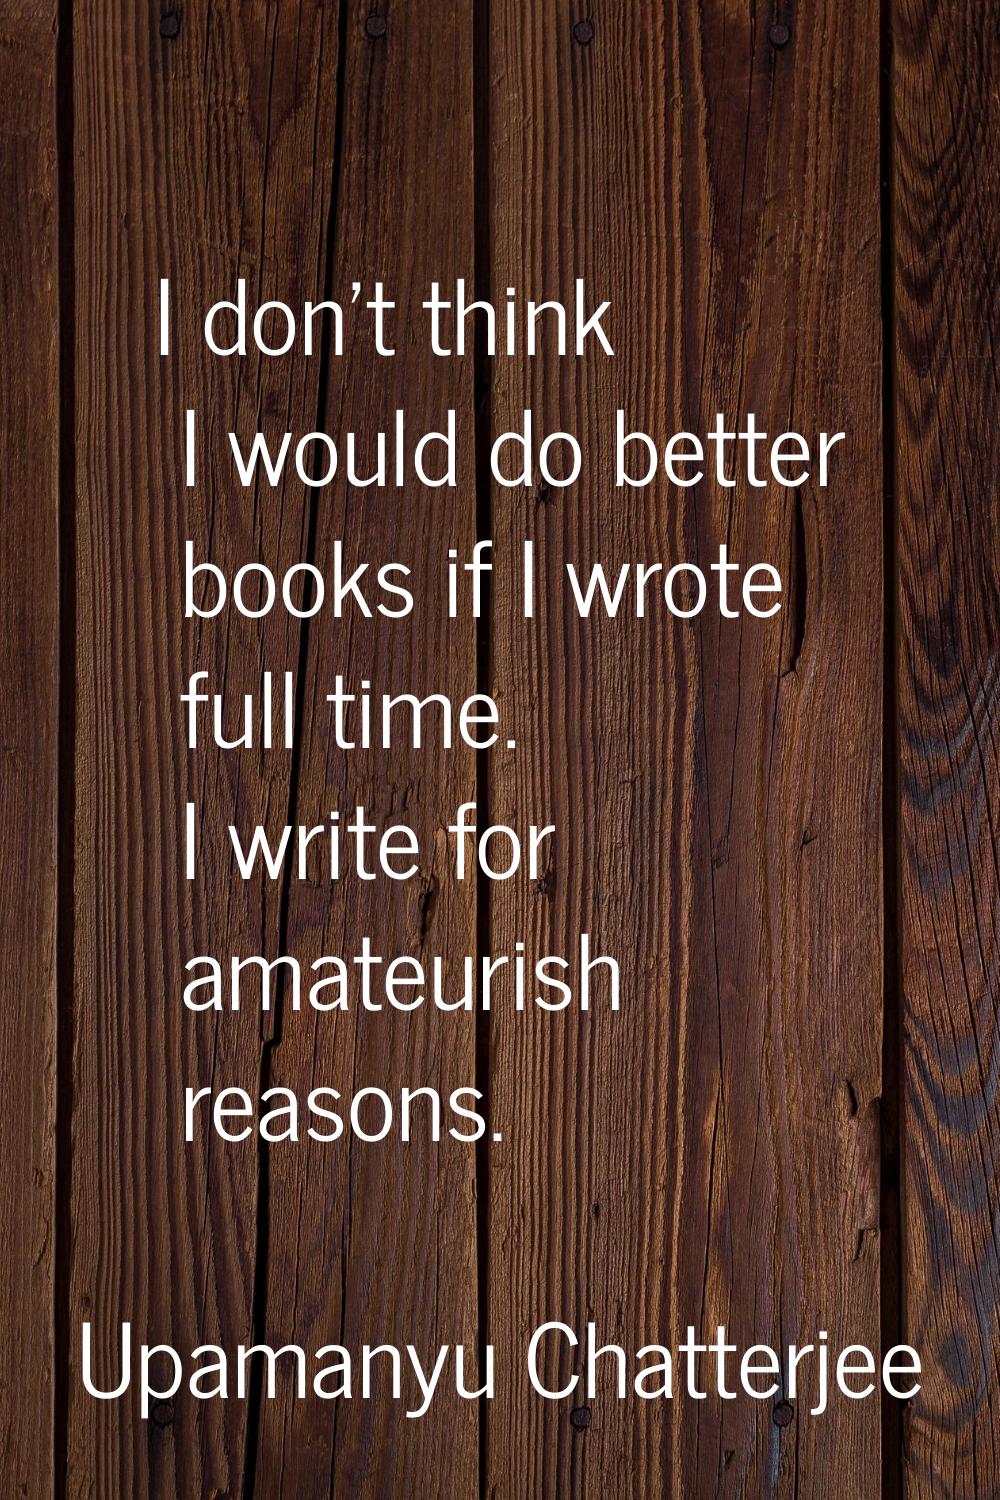 I don't think I would do better books if I wrote full time. I write for amateurish reasons.